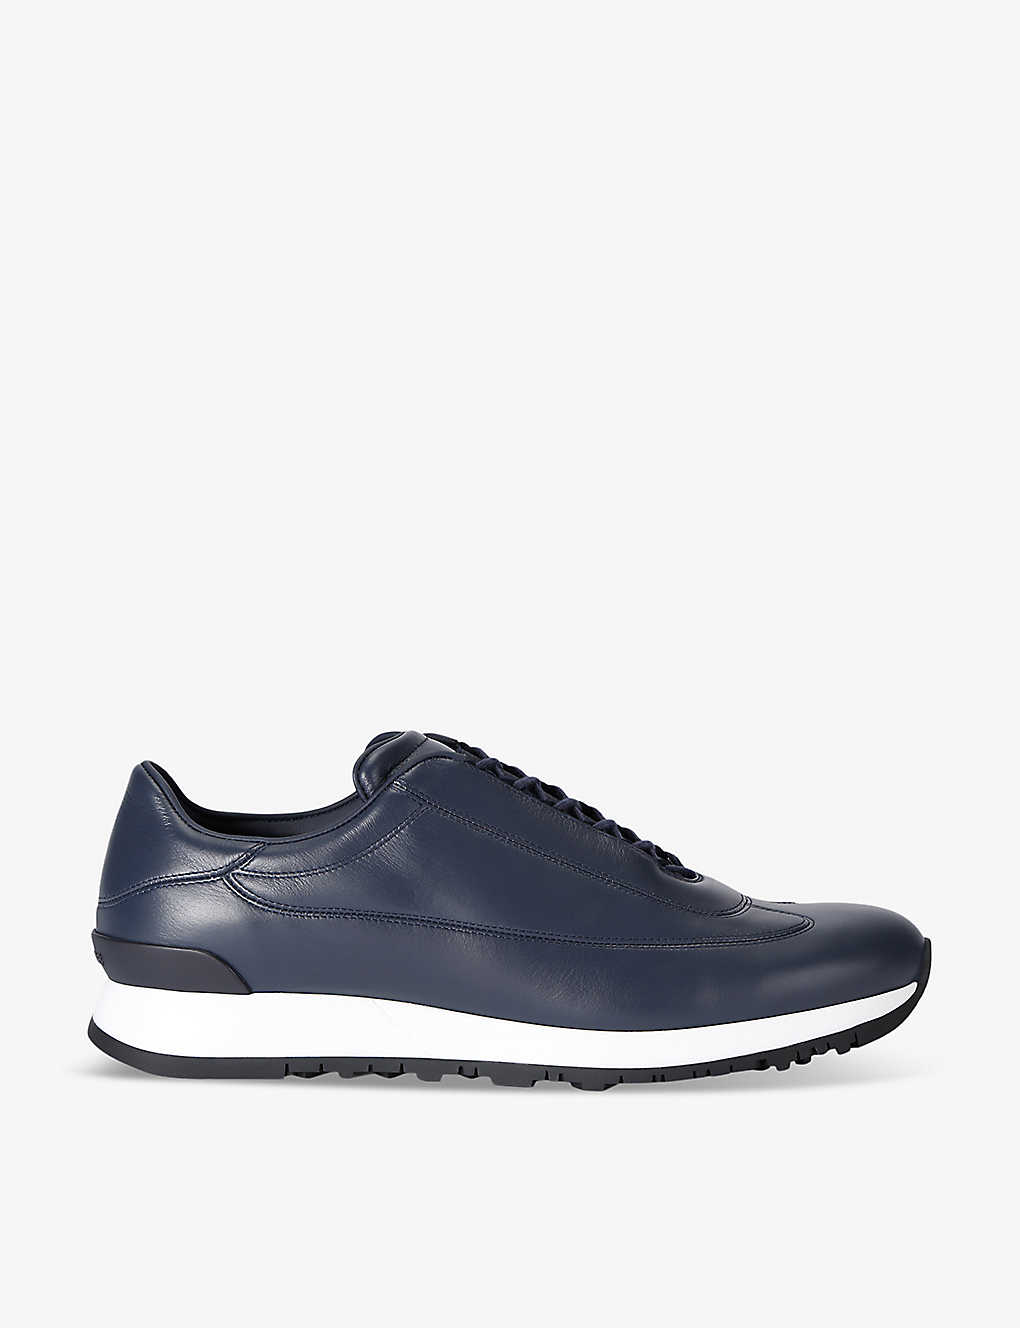 John Lobb Mens Blue/dark Lift Lace-up Leather Low-top Trainers